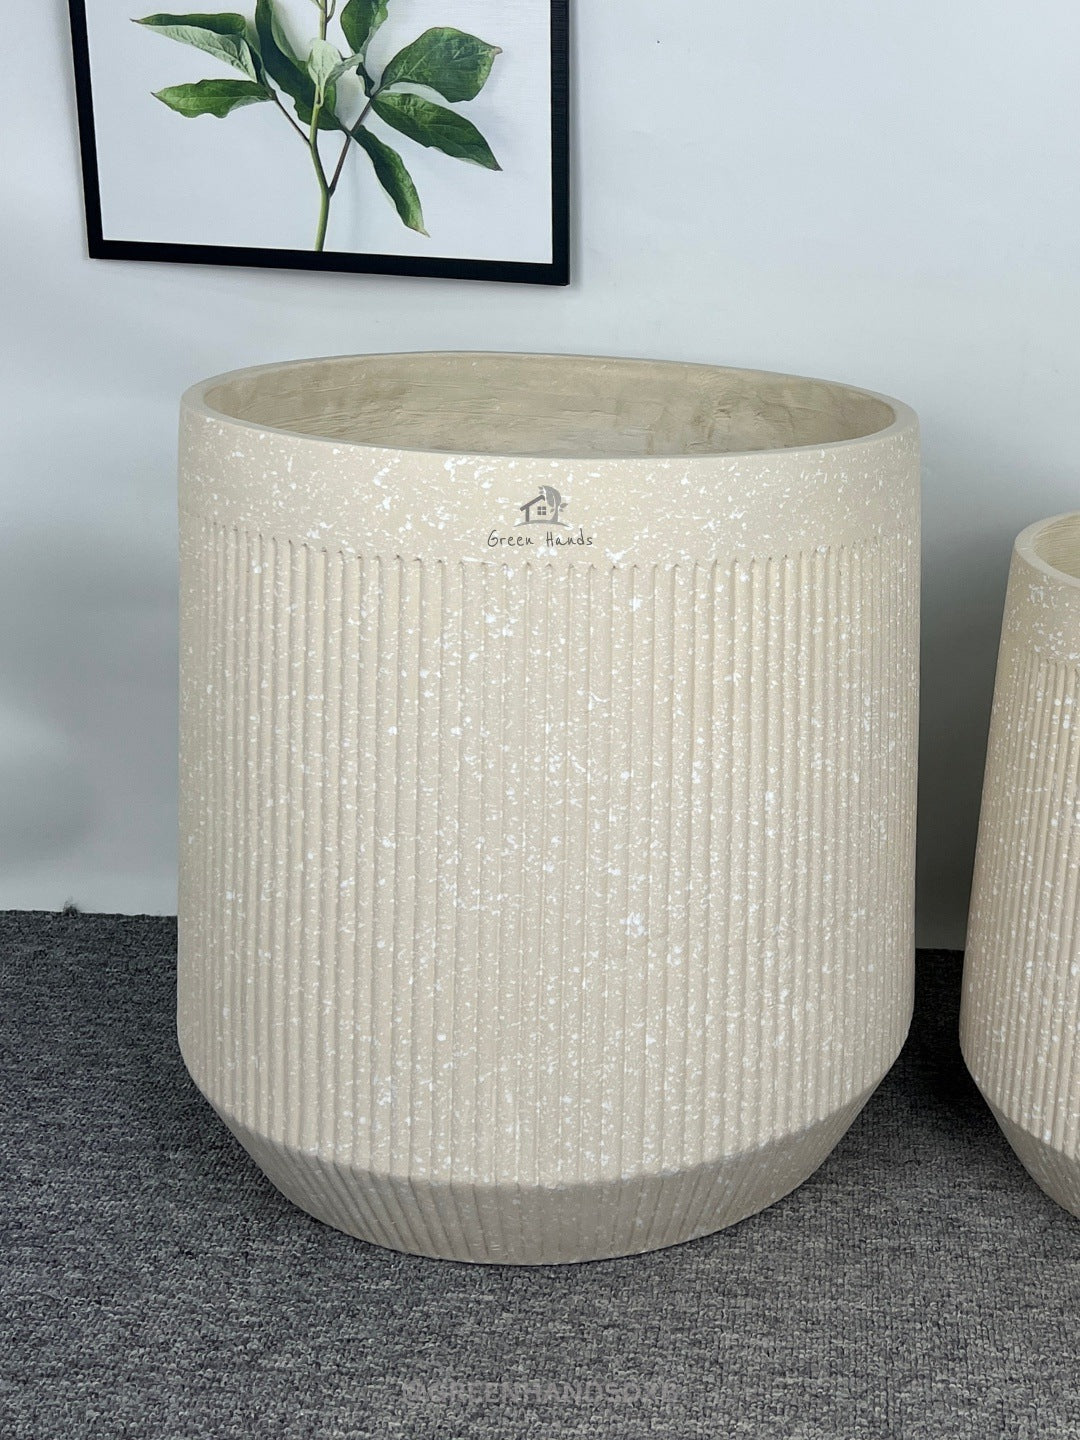 Elegant Ribbed Ficonstone Beige Flower Pot with Drain Holes & Base Plate - Enhance Your Decor with Large Indoor Plants